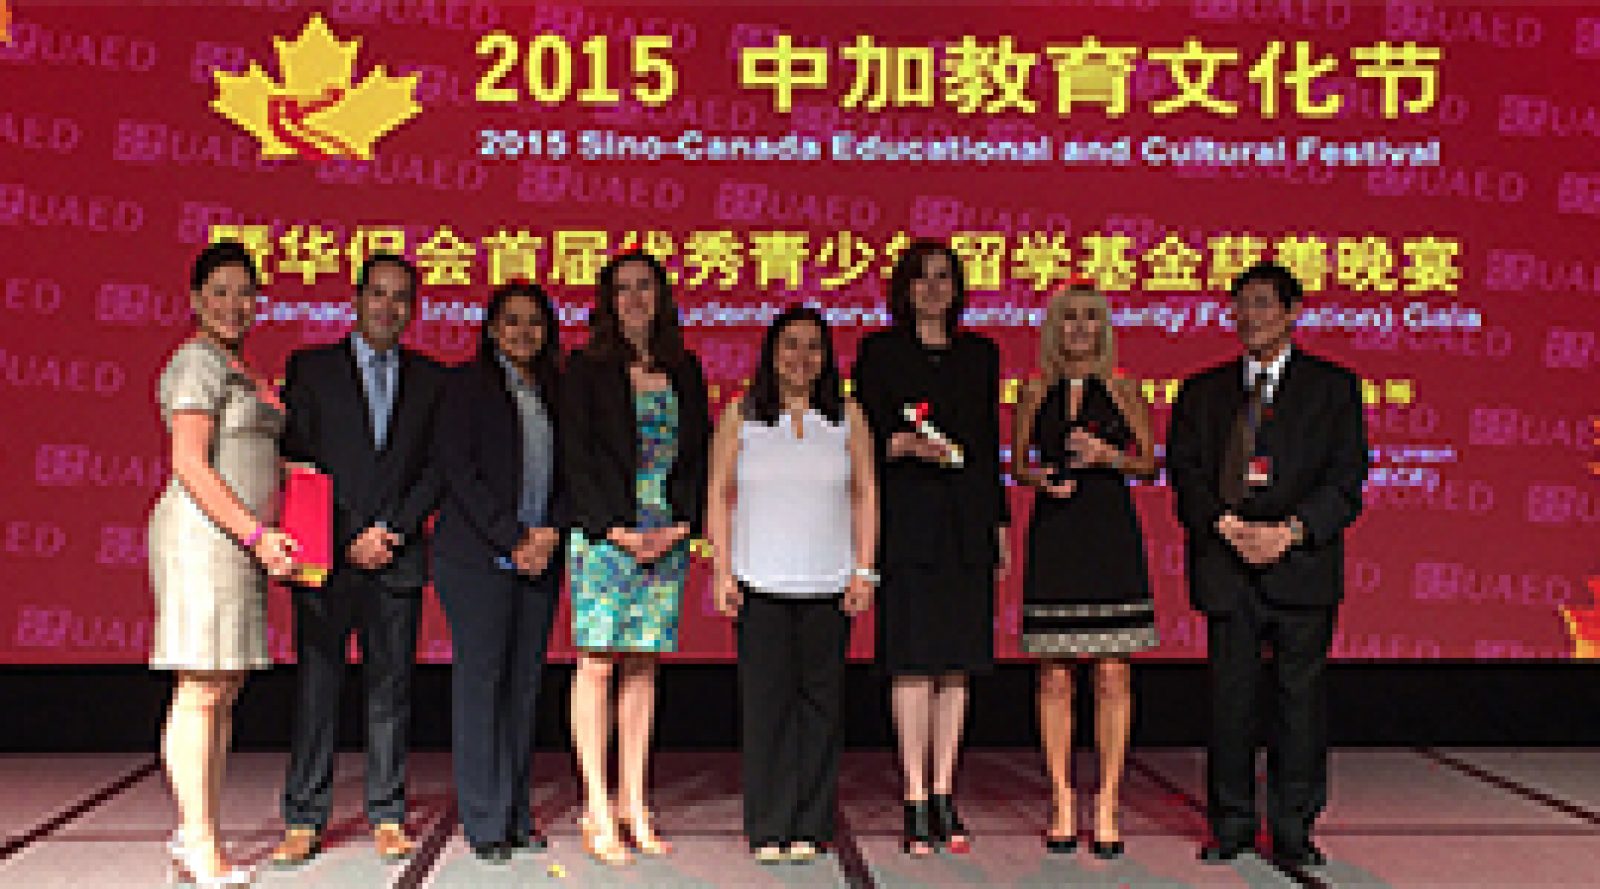 English Language Institute awarded a Certificate of Recognition as an Excellent Organization in Sino-Canadian Education